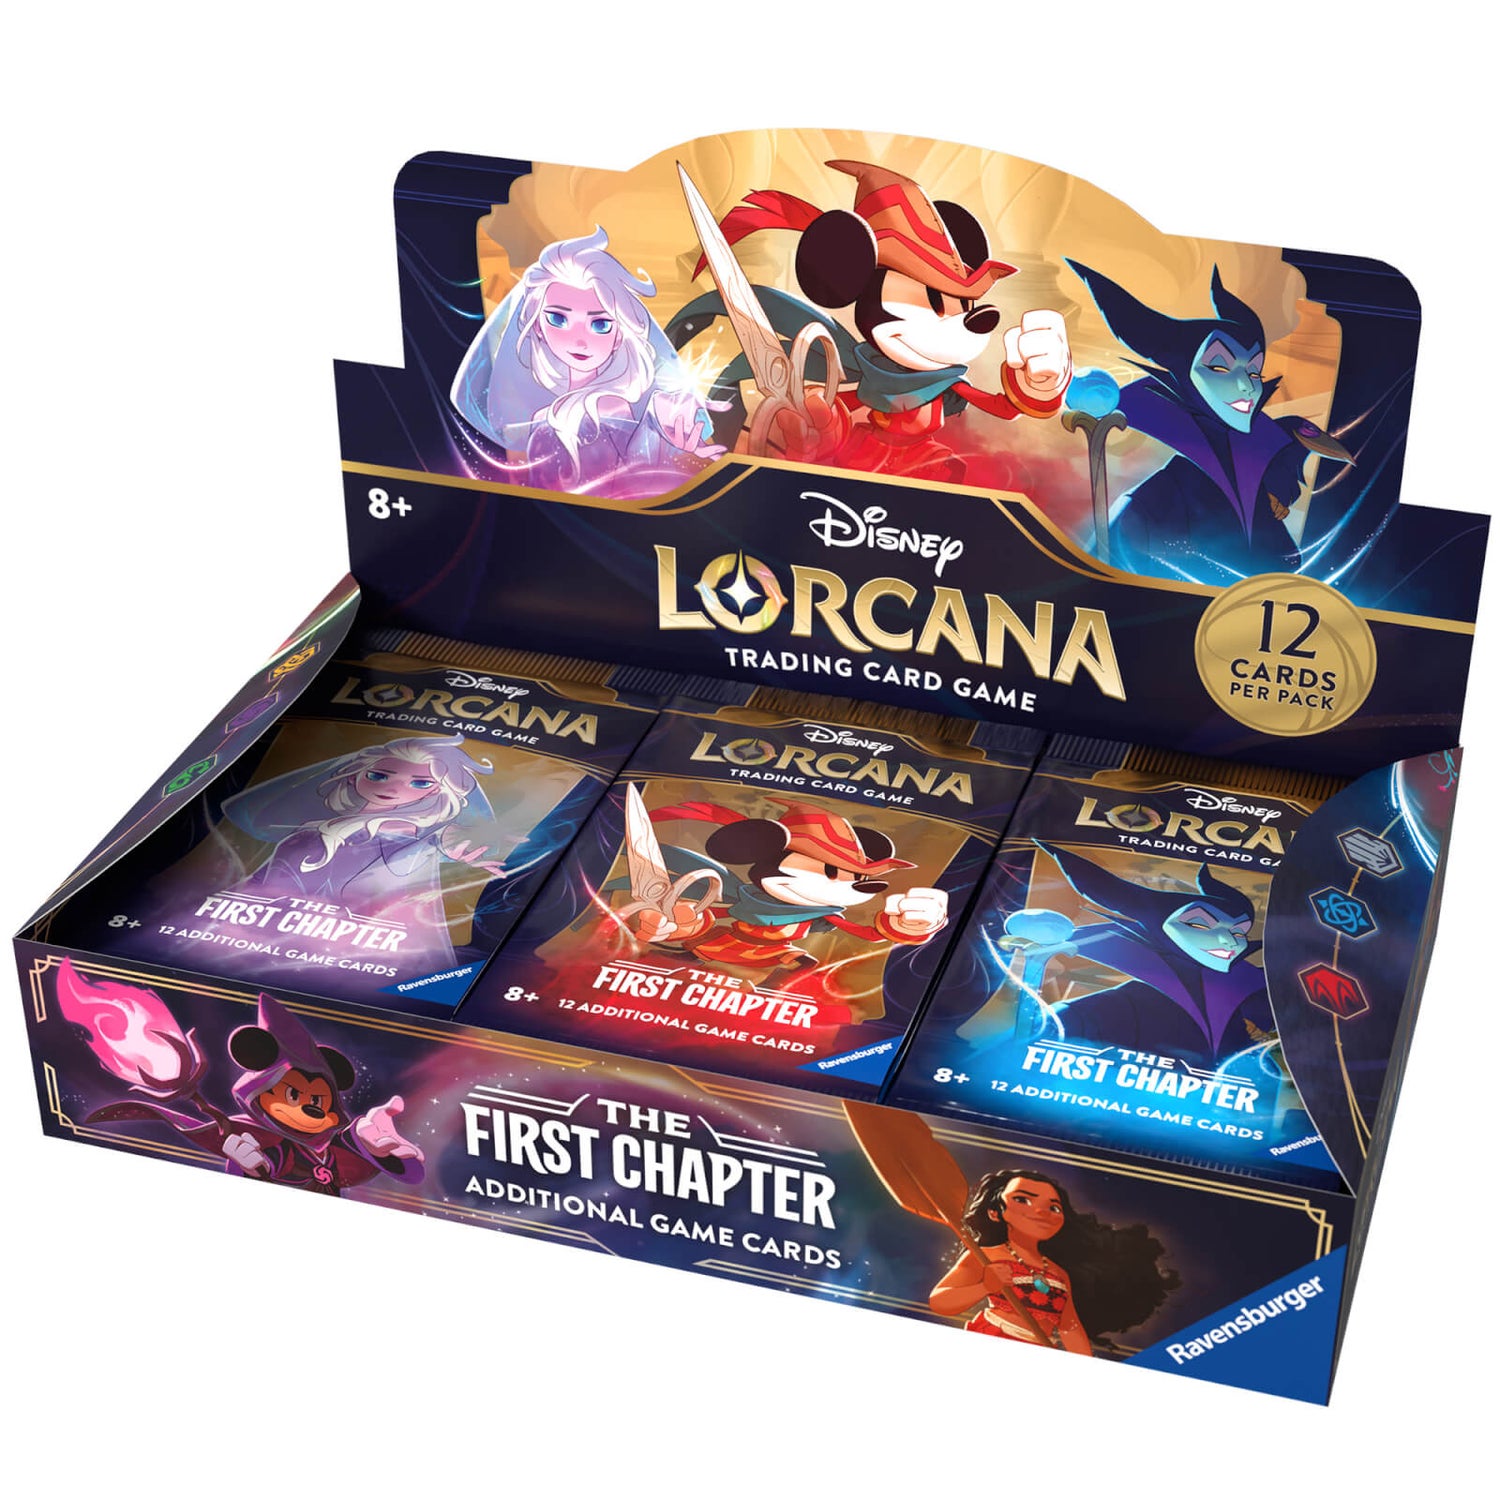 Disney Lorcana Trading Card Game The First Chapter Booster Packs CDU (24 Packs)